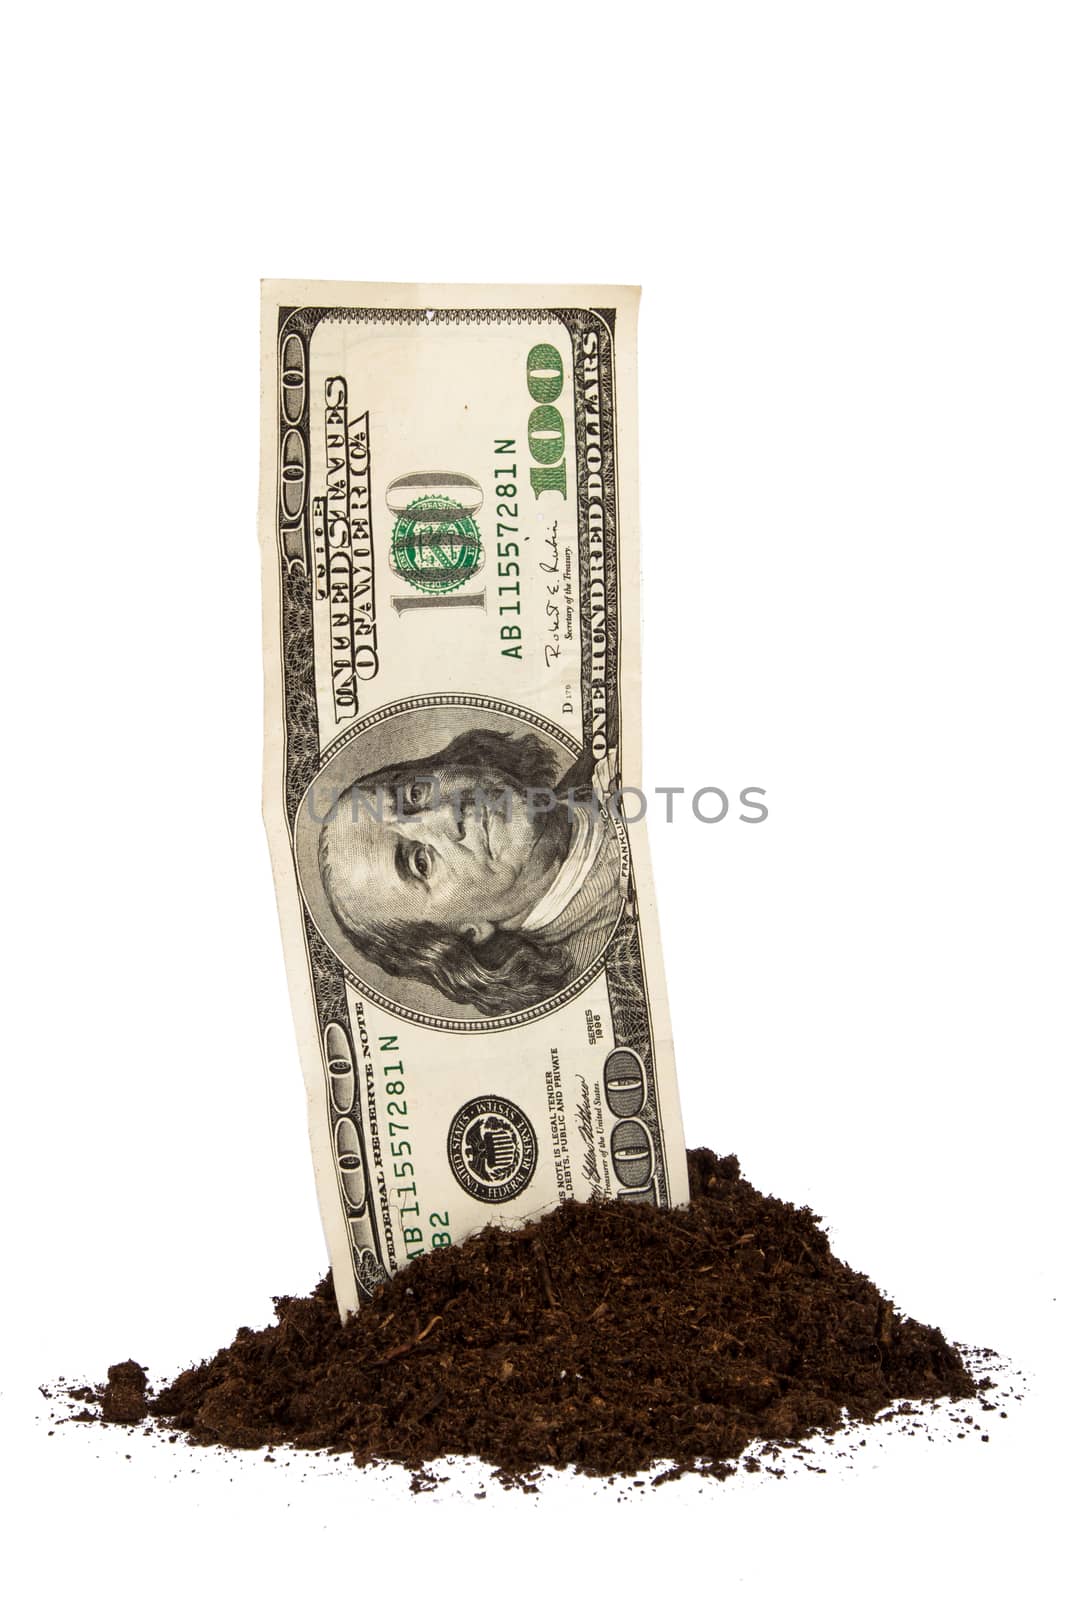 Pile of soil with one hundred dollar bill, isolated on white background.